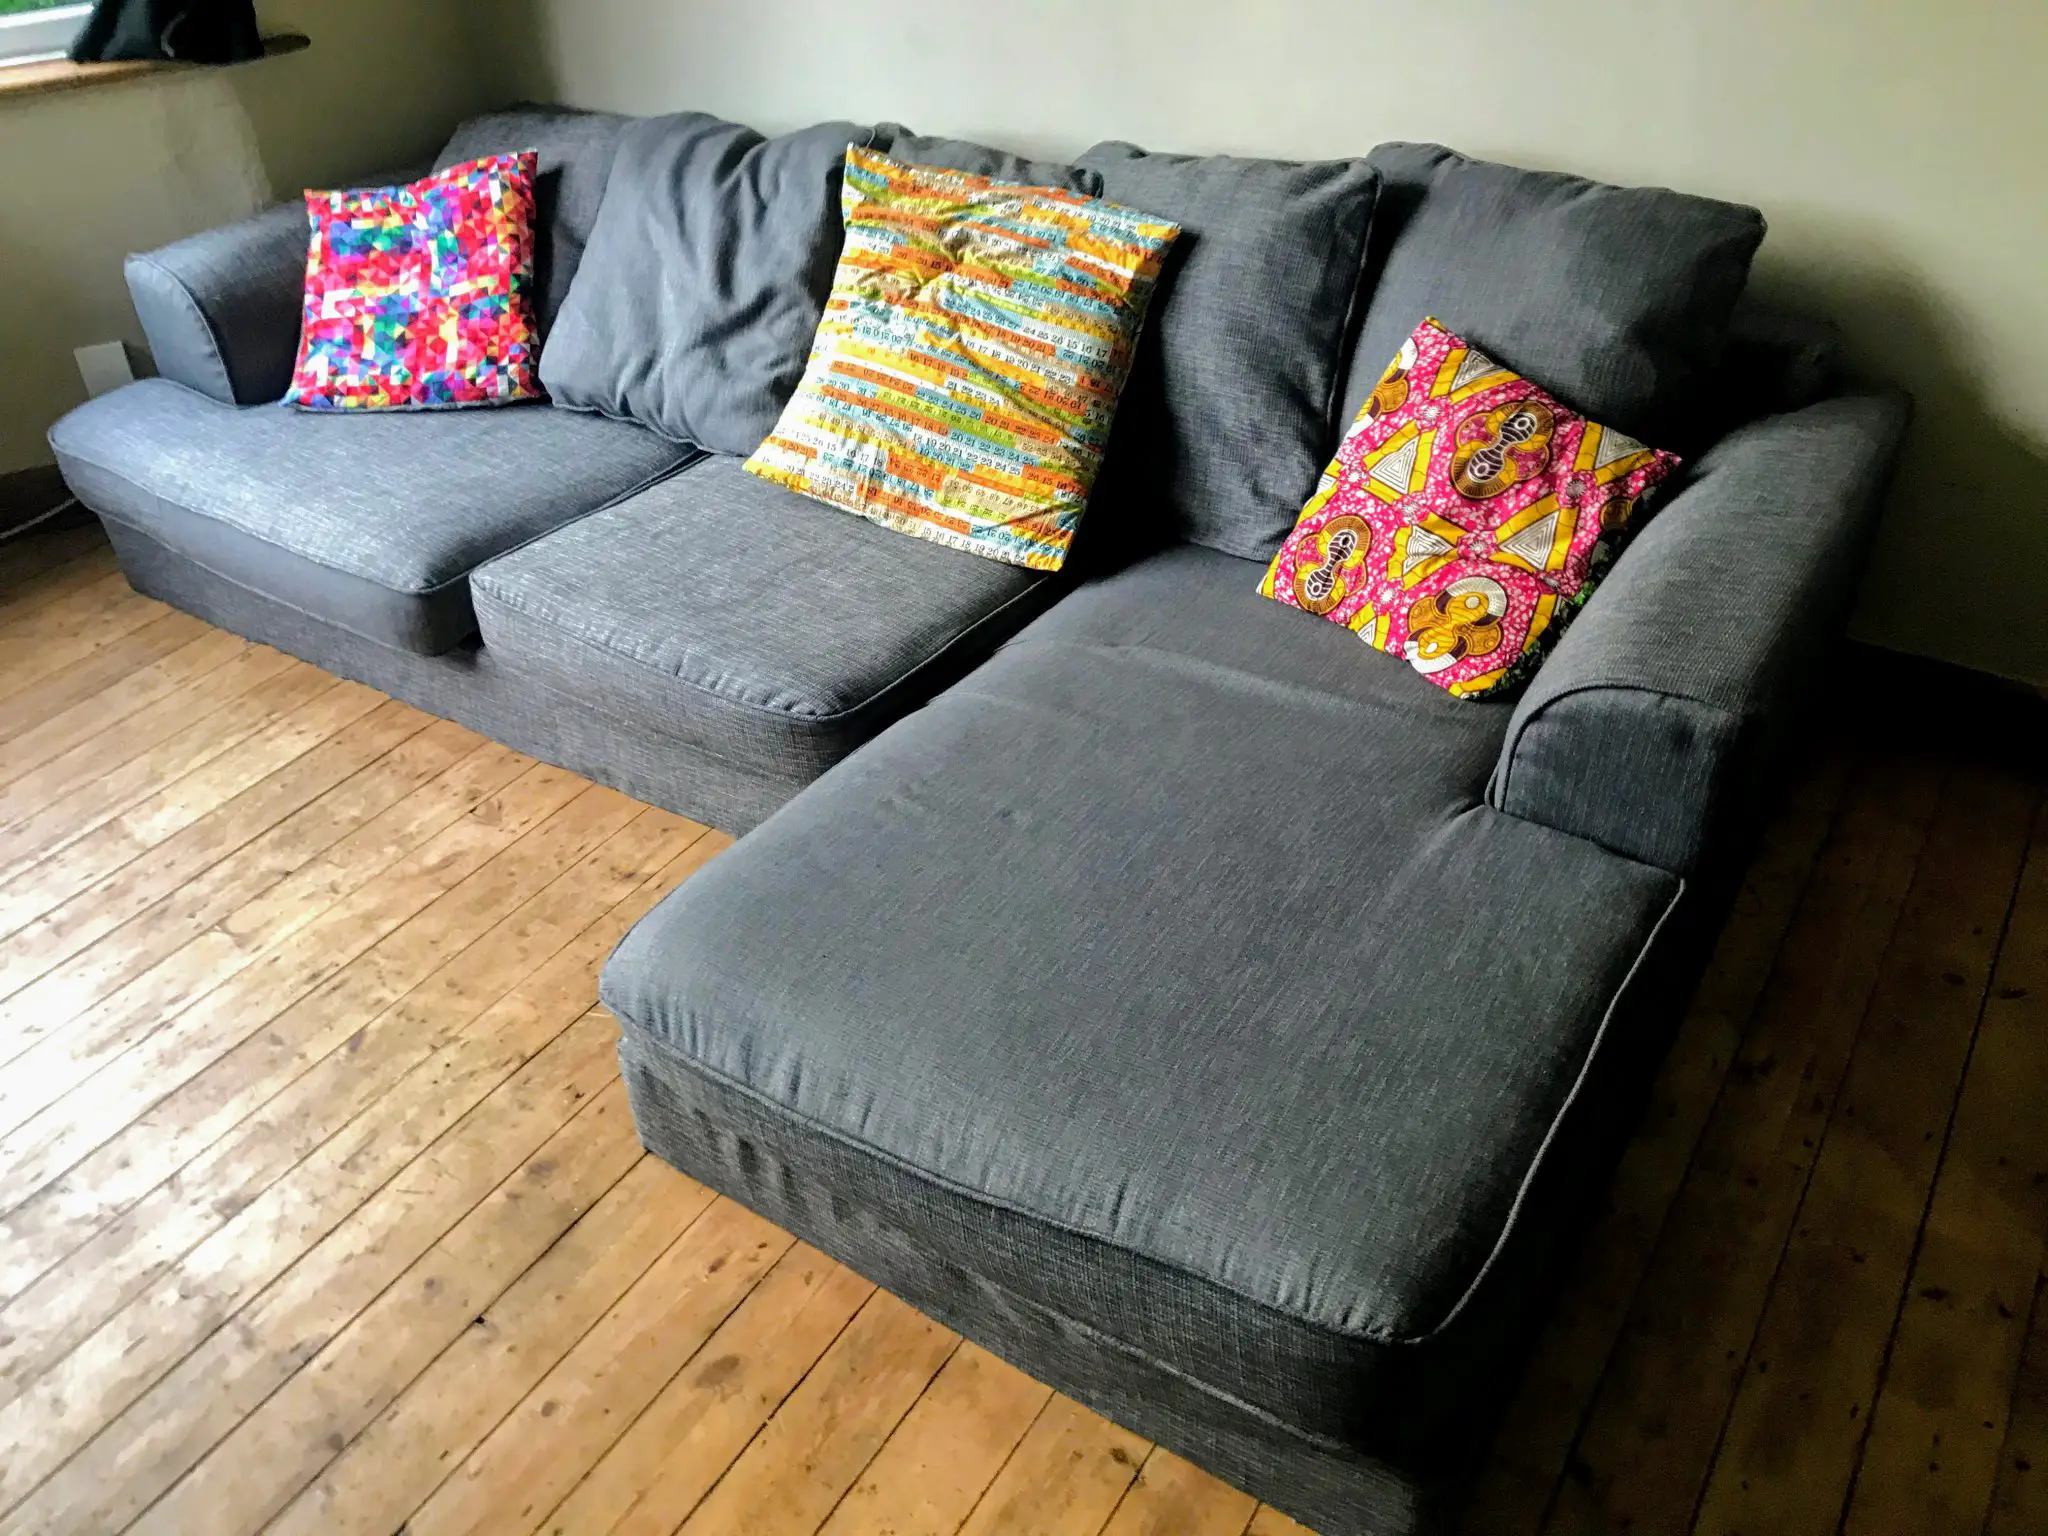 The easiest guide to reupholstering a sofa for beginners